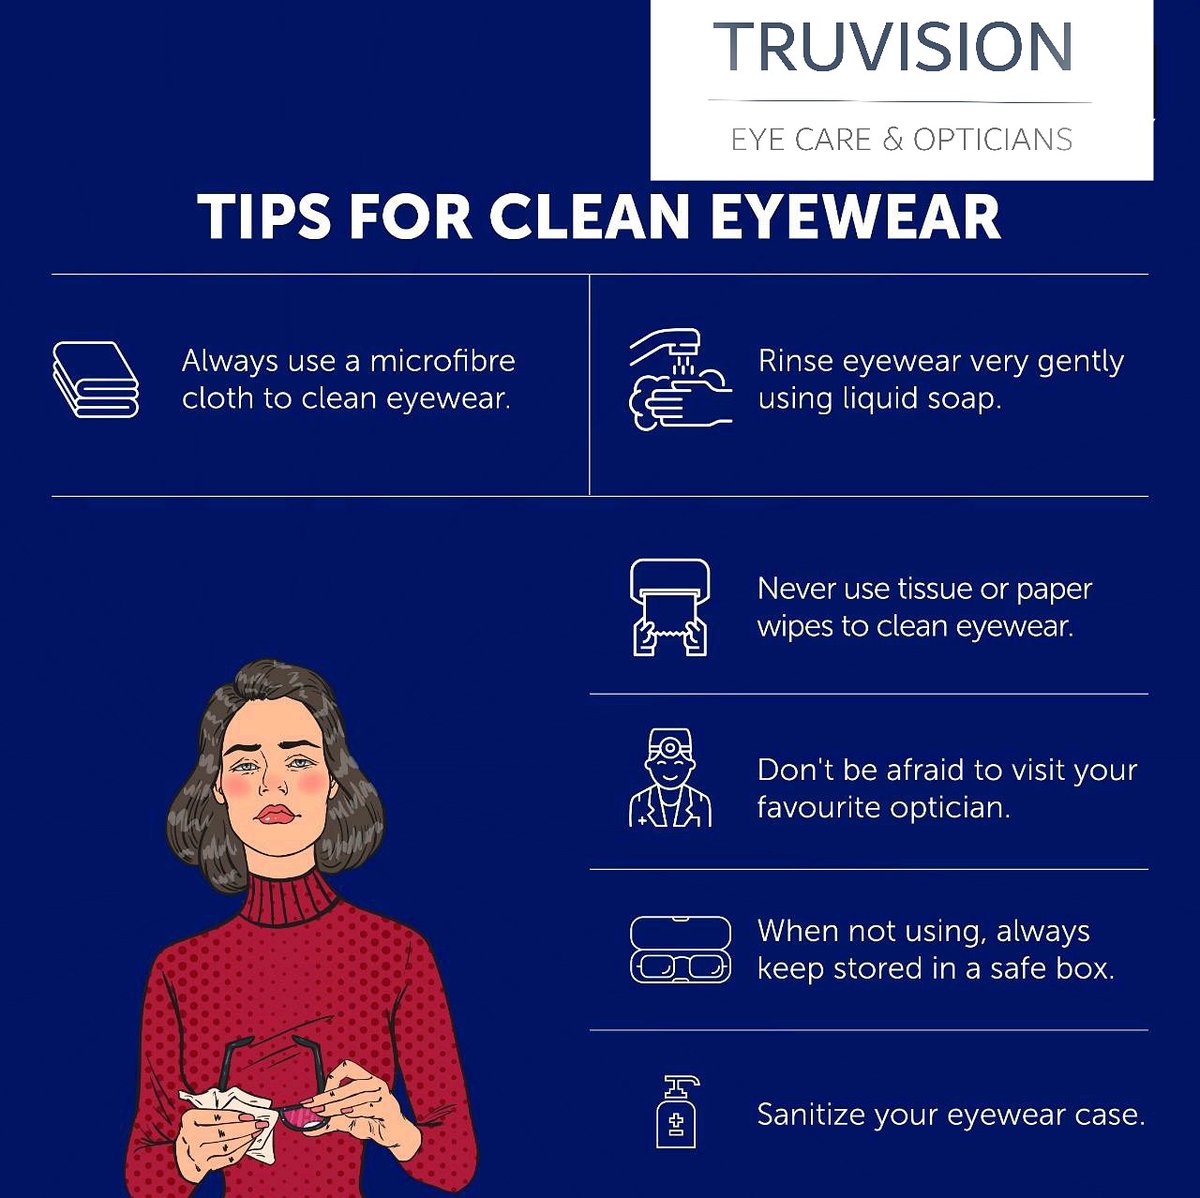 #TruVision #COVIDsafety #CleanEyewear #Hygiene #Healthyvision #Keepitclean #Eyecare